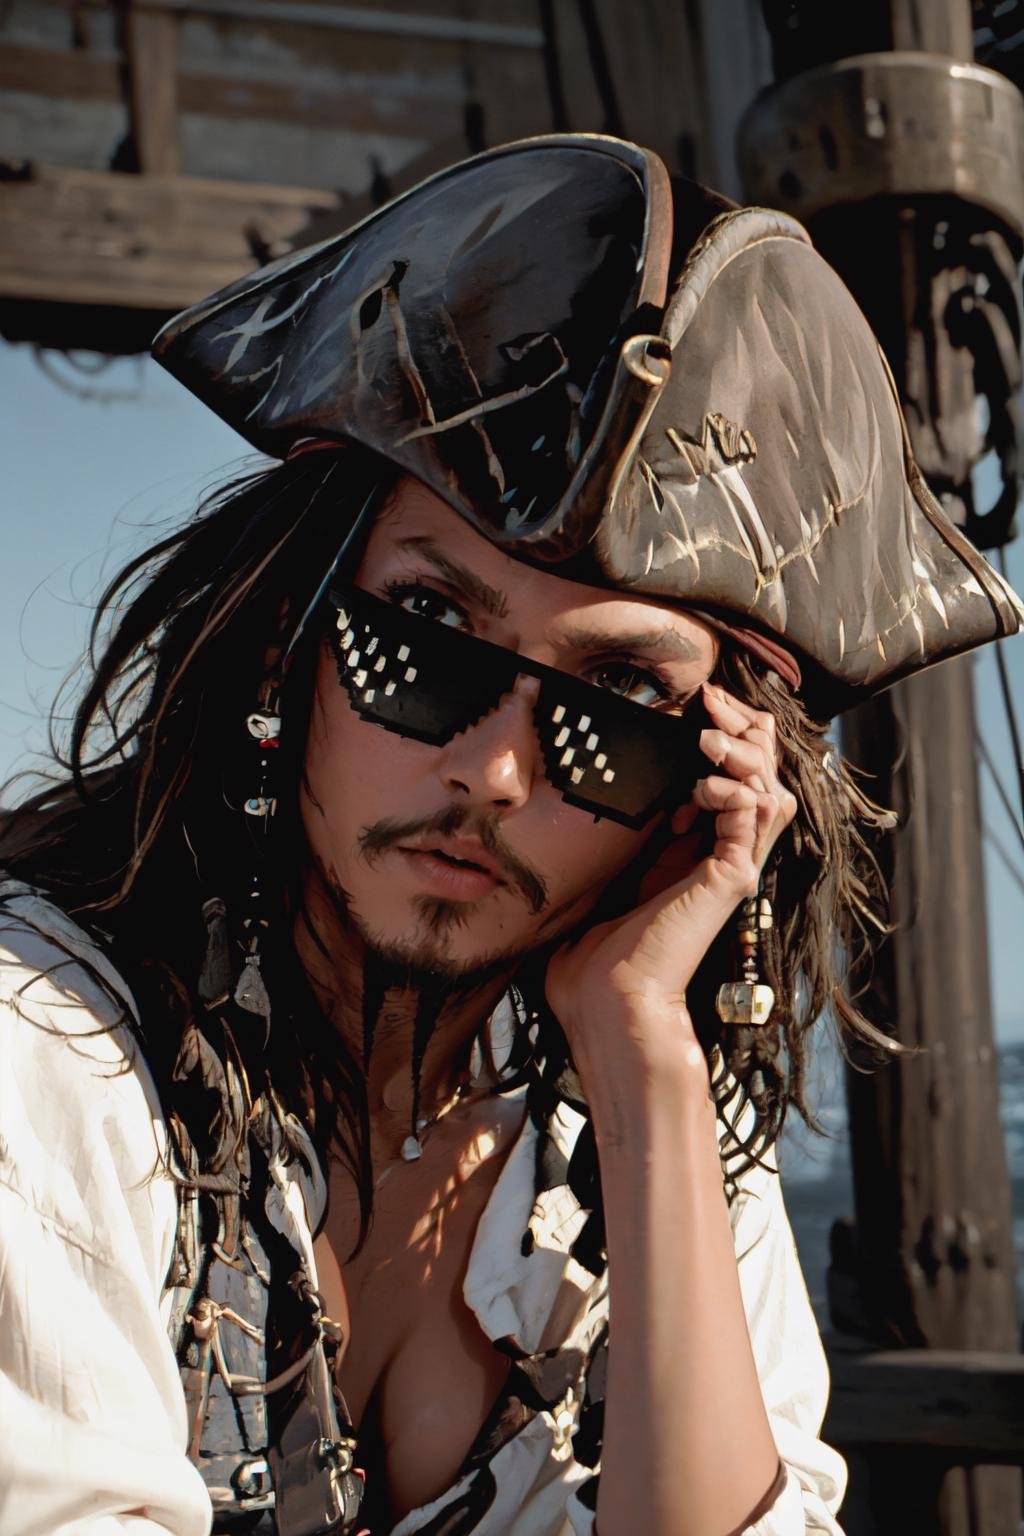 Highly detailed, High Quality, Masterpiece, beautiful, IncrsSMRCMeme, <lora:SailorMoonRedrawChallengeMeme:1>, jack sparrow, hat, brown hair, earrings, hat, pirate, jewelry, shirt, short hair, white shirt,  <lora:Char_Sigmas_JackSparrow:1>, DealWithIt, sunglasses, <lora:Outfit_DealWithIt:1>